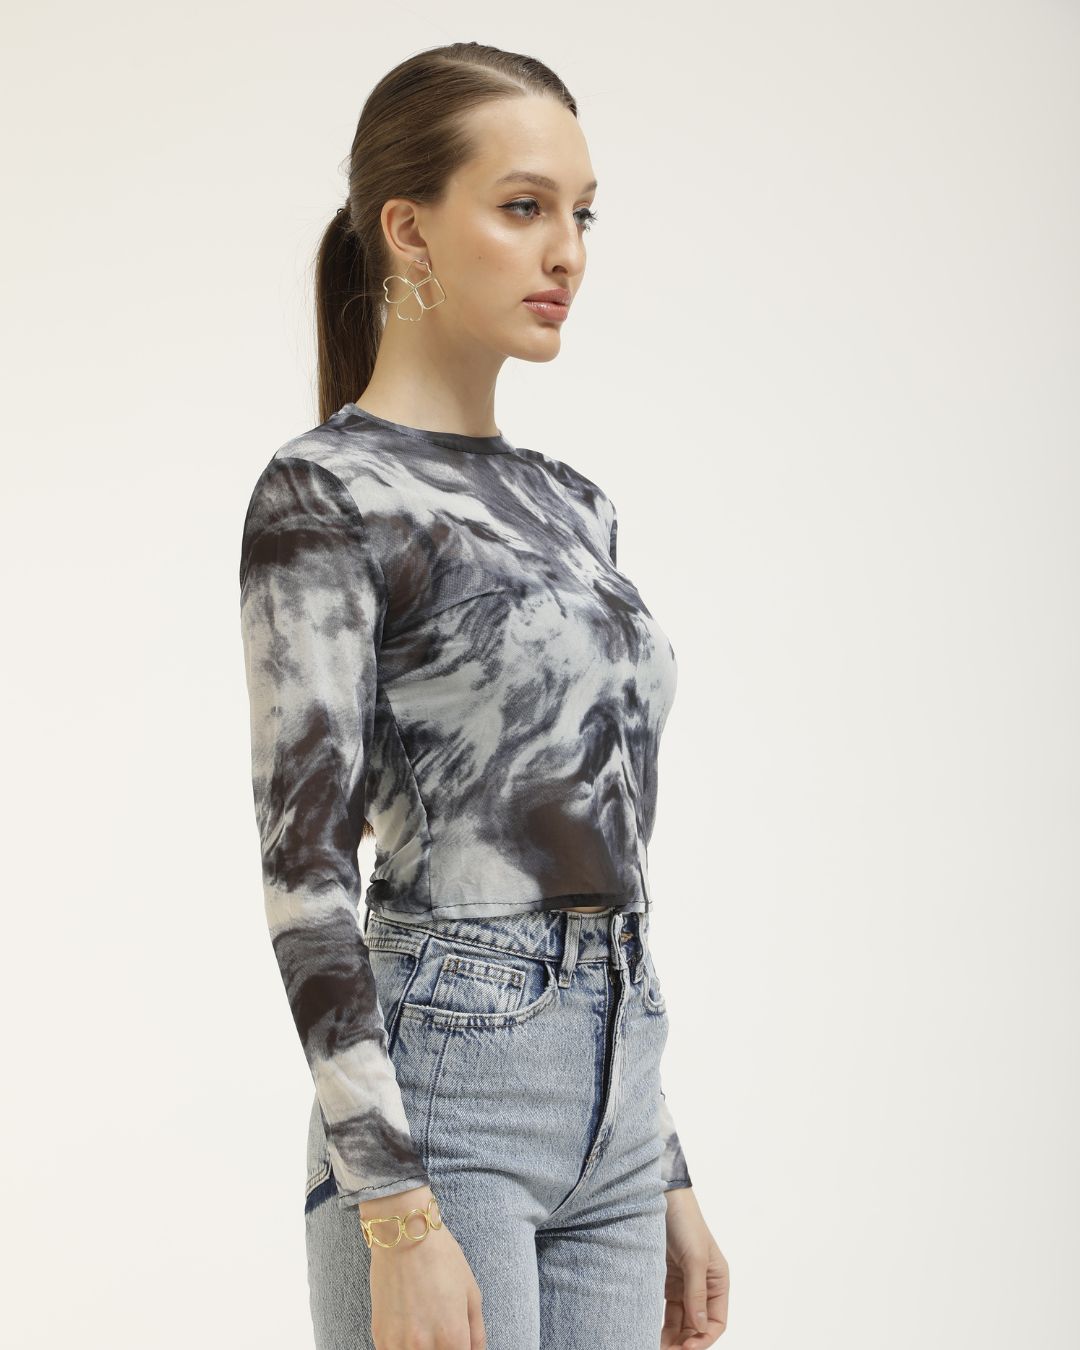 ABSTRACT PRINTED MESH TOP,abstract, black, crew neck, crop, full sleeves, grey, lycra, mesh, printed, sheer, slim fit, stretchable, tops, topwear, white,abstract-printed-skinny-top,Neck - Crew neckSleeve - Full sleevesFit - Slim fitPrint/Pattern - Abstract printedColor - Black, White, GreyMaterial - 4 way stretch mesh Size - Waist ( 26 - 32 ), Bust ( 30 - 34 )